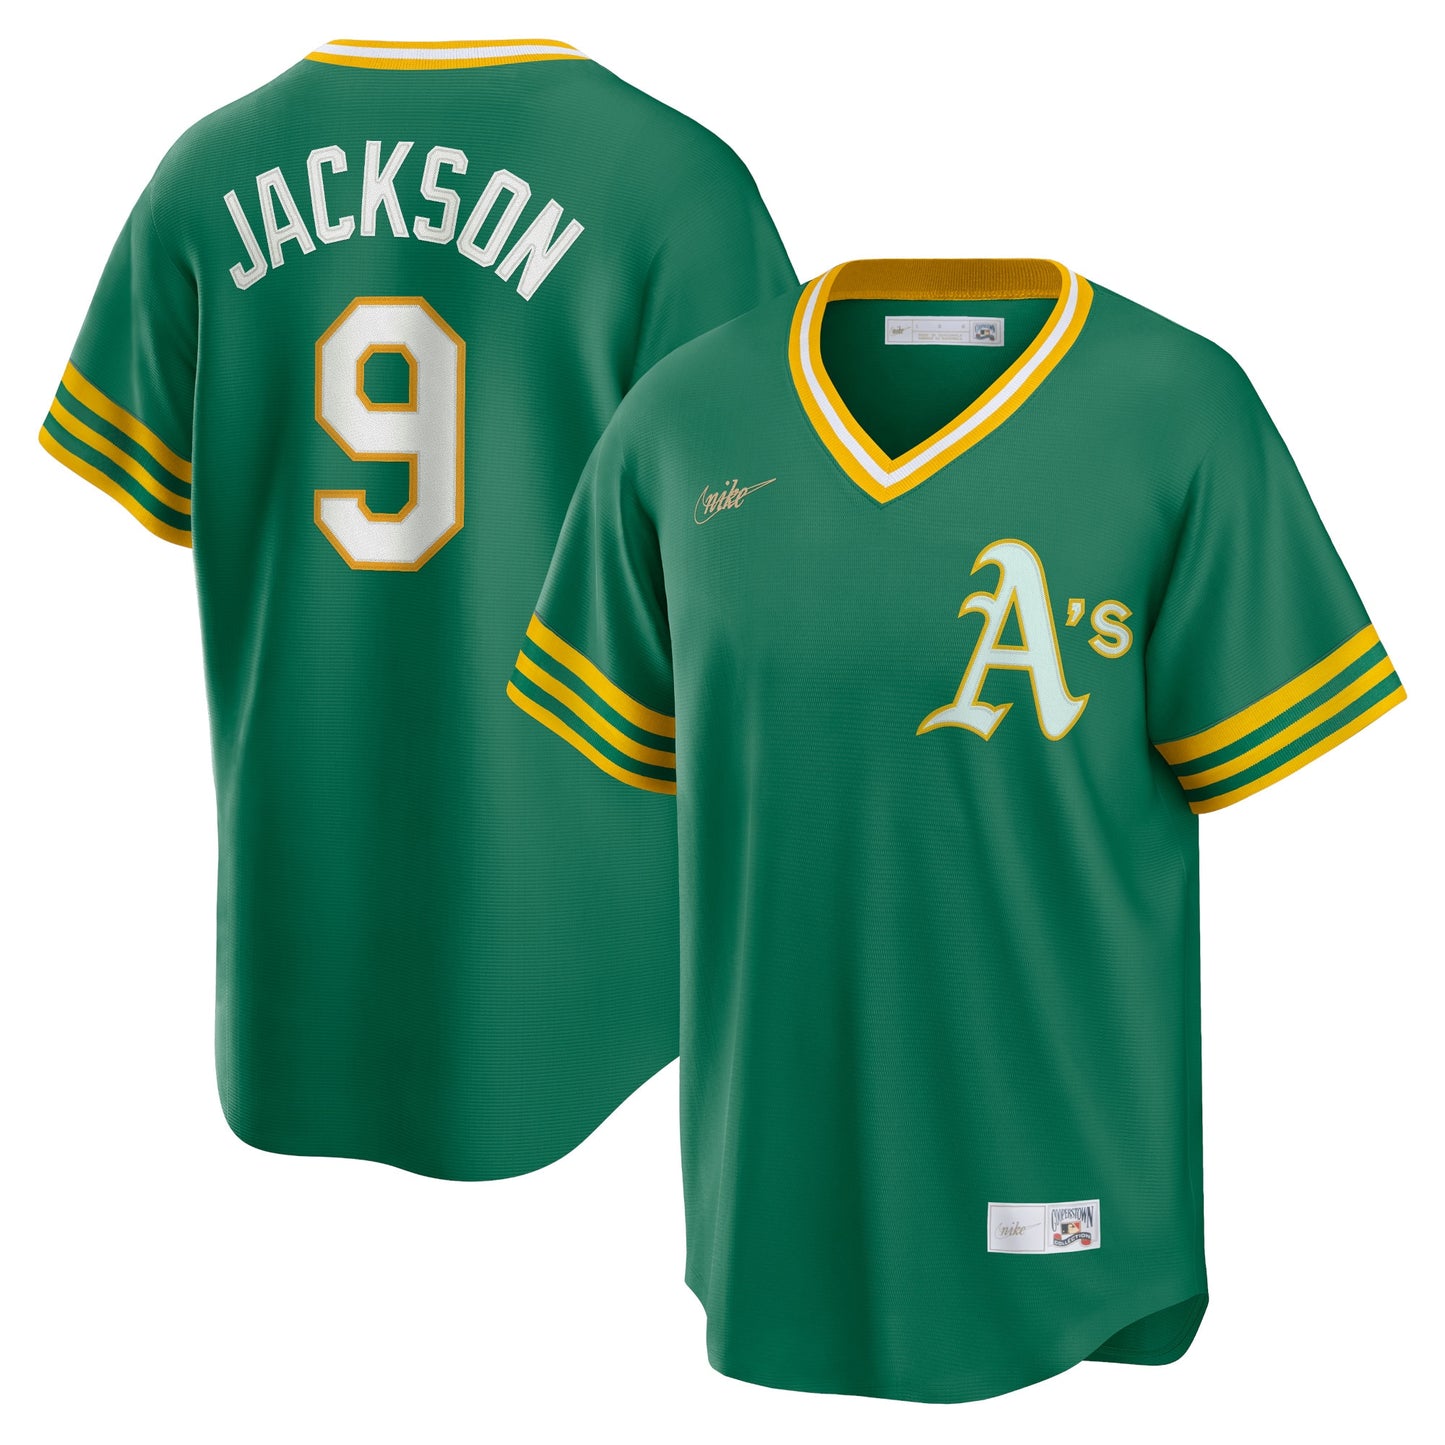 Reggie Jackson Oakland Athletics Nike Road Cooperstown Collection Player Jersey - Kelly Green